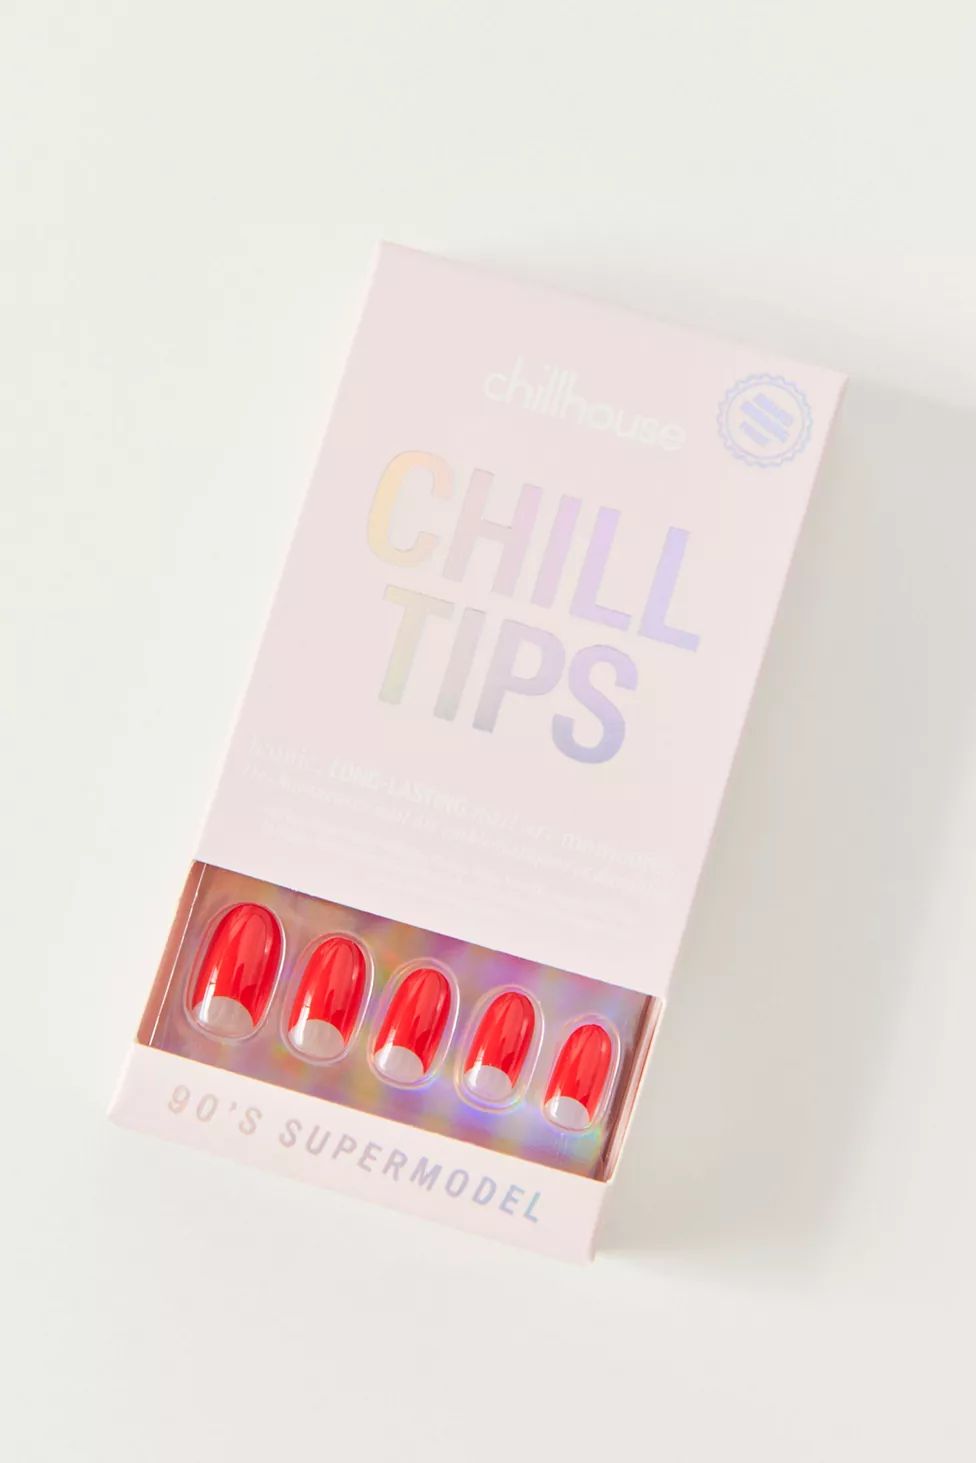 Chillhouse Chill Tips Press-On Manicure Kit | Urban Outfitters (US and RoW)